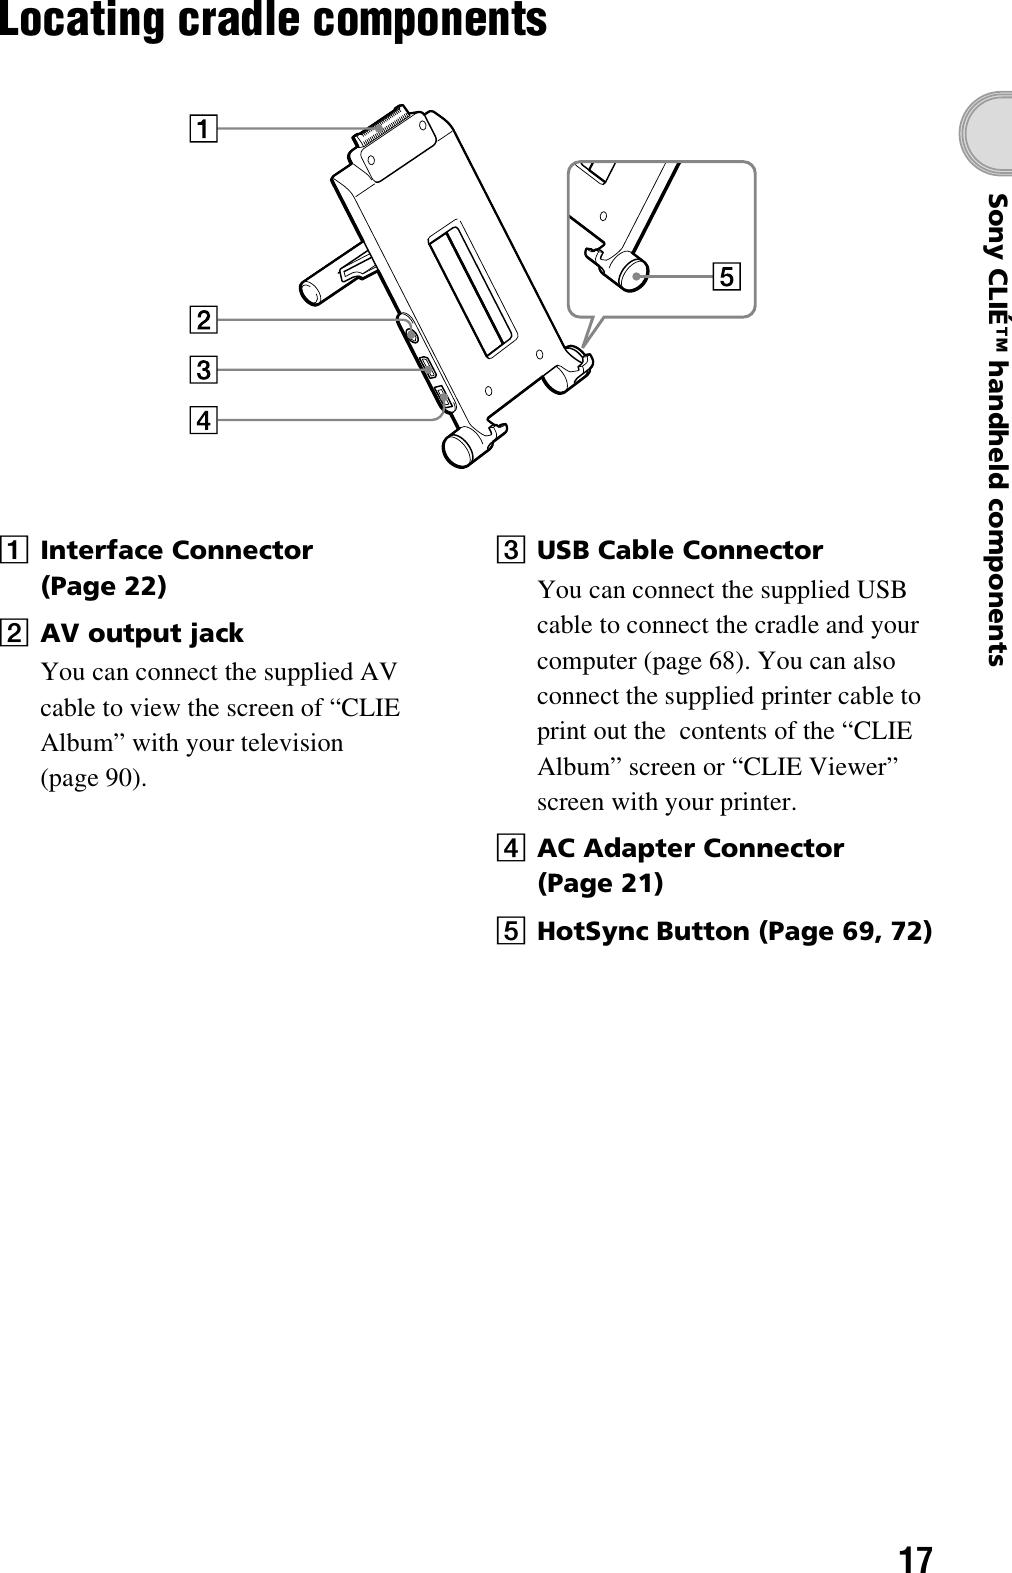 17Sony CLIÉ™ handheld componentsLocating cradle componentsAInterface Connector (Page 22)BAV output jackYou can connect the supplied AV cable to view the screen of “CLIE Album” with your television (page 90).CUSB Cable ConnectorYou can connect the supplied USB cable to connect the cradle and your computer (page 68). You can also connect the supplied printer cable to print out the  contents of the “CLIE Album” screen or “CLIE Viewer” screen with your printer.DAC Adapter Connector (Page 21)EHotSync Button (Page 69, 72)